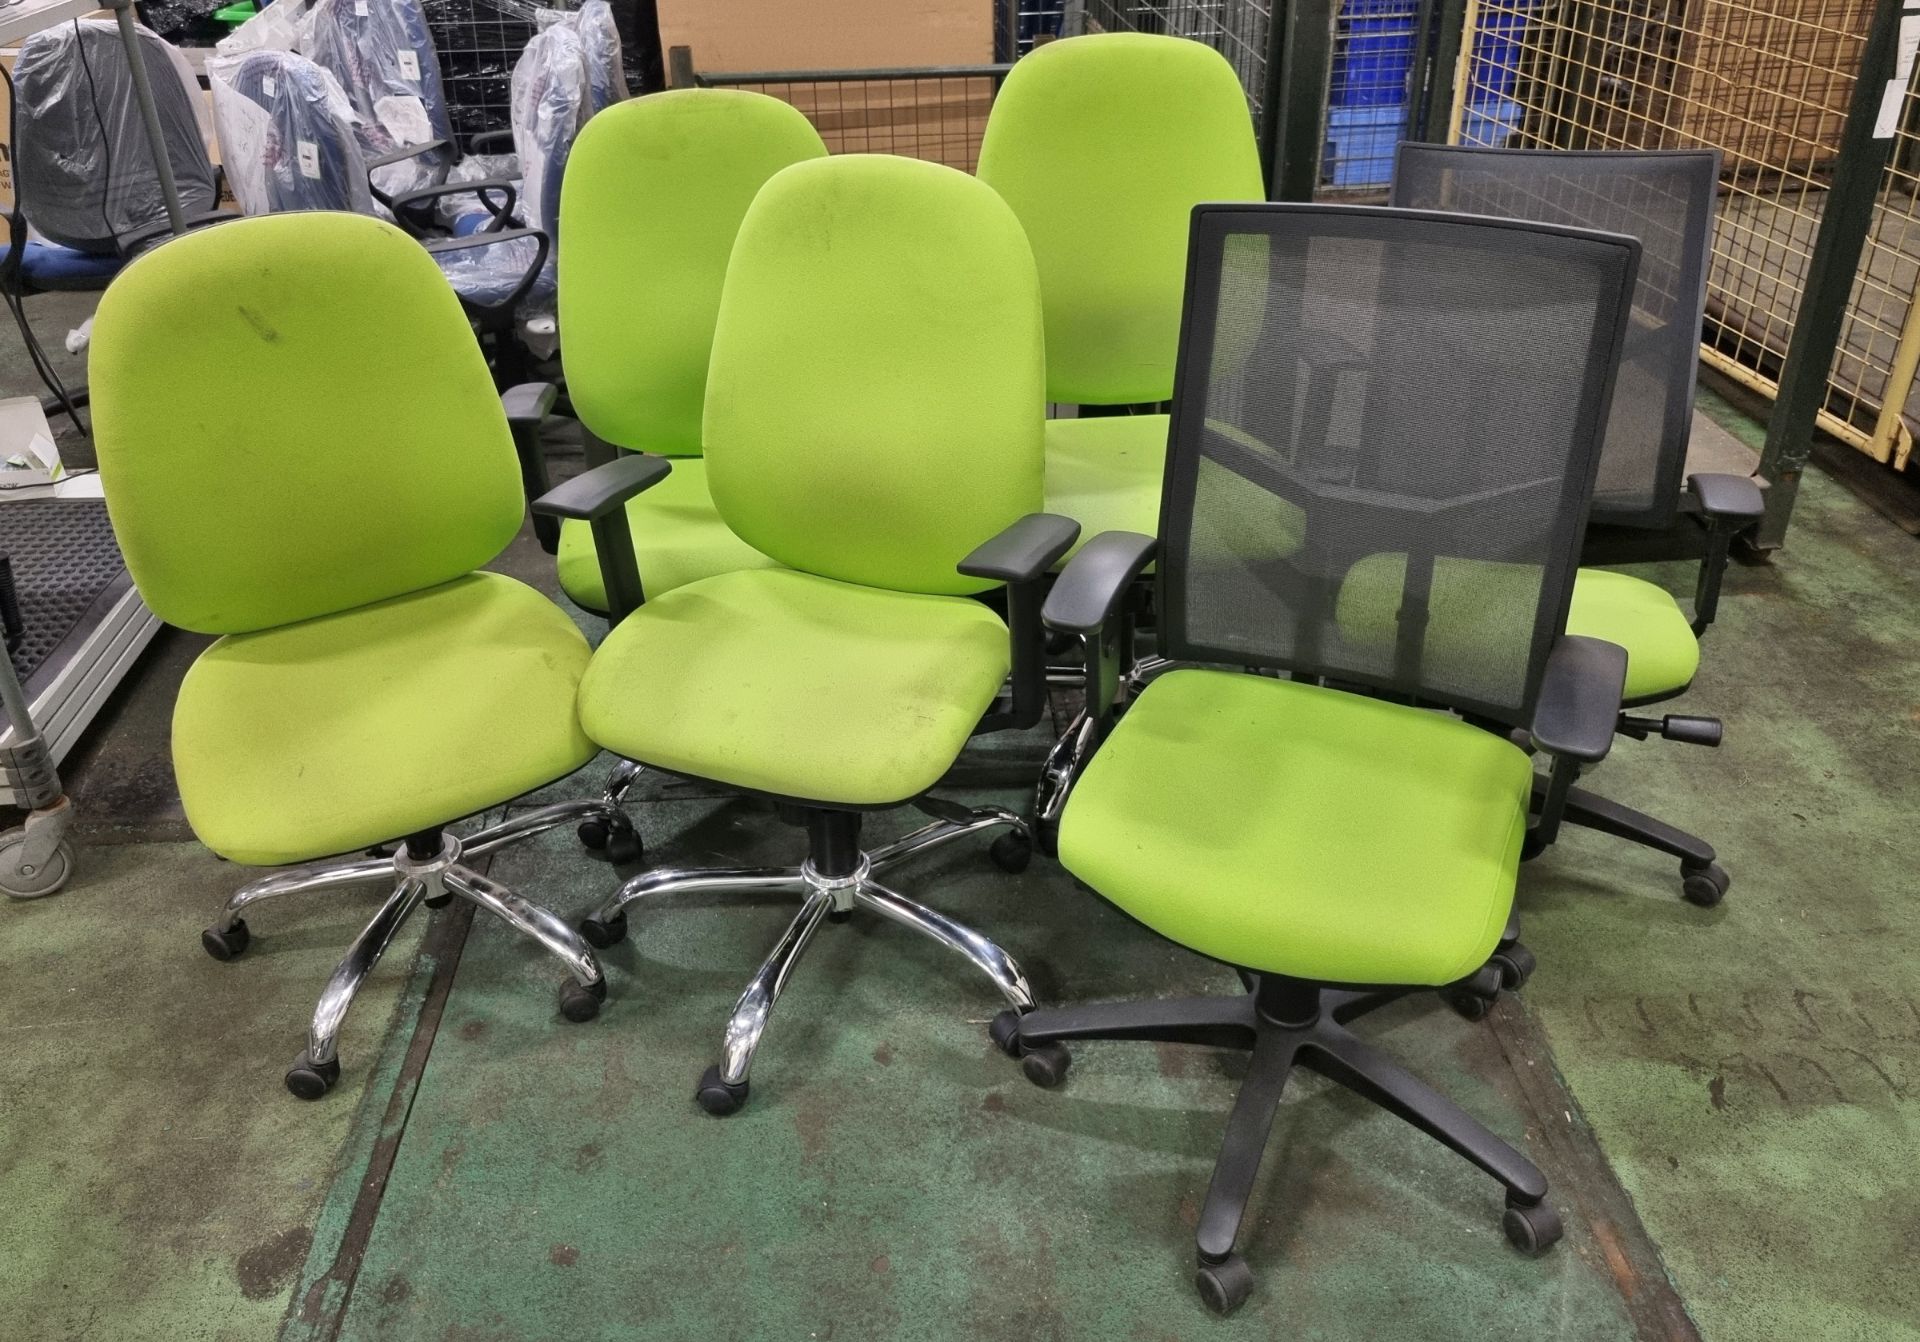 6x assorted green office chairs